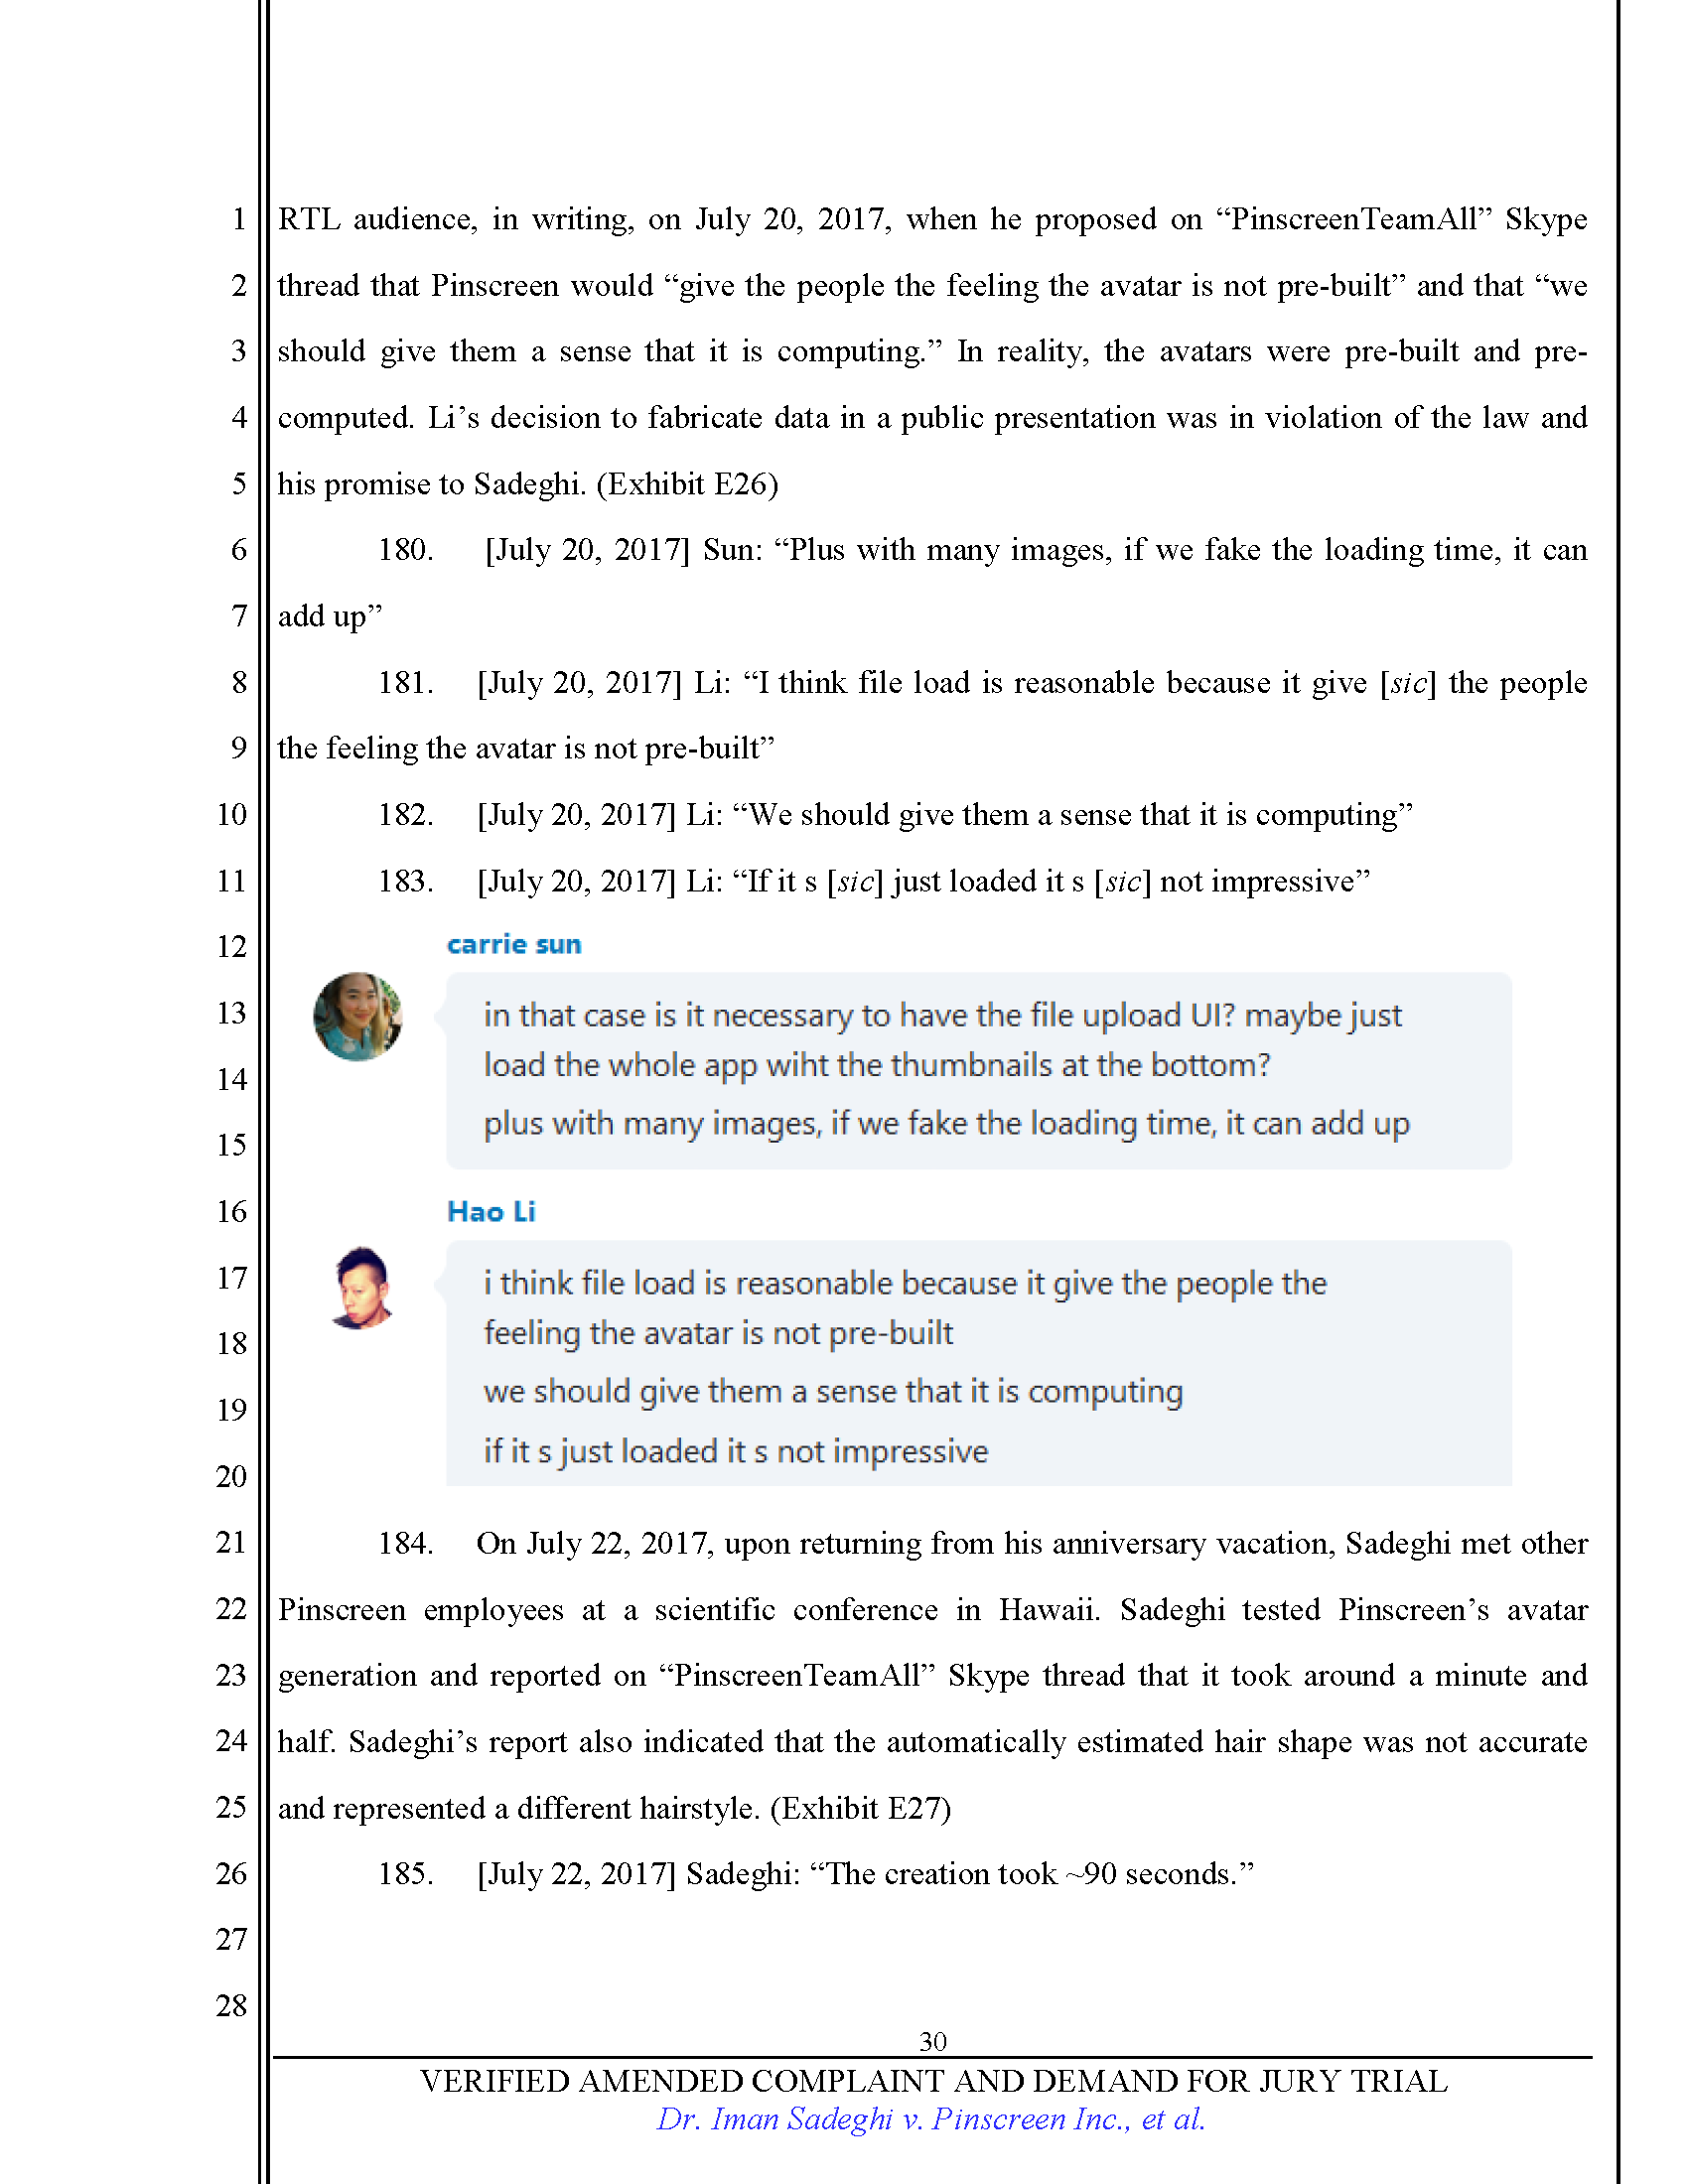 First Amended Complaint (FAC) Page 30